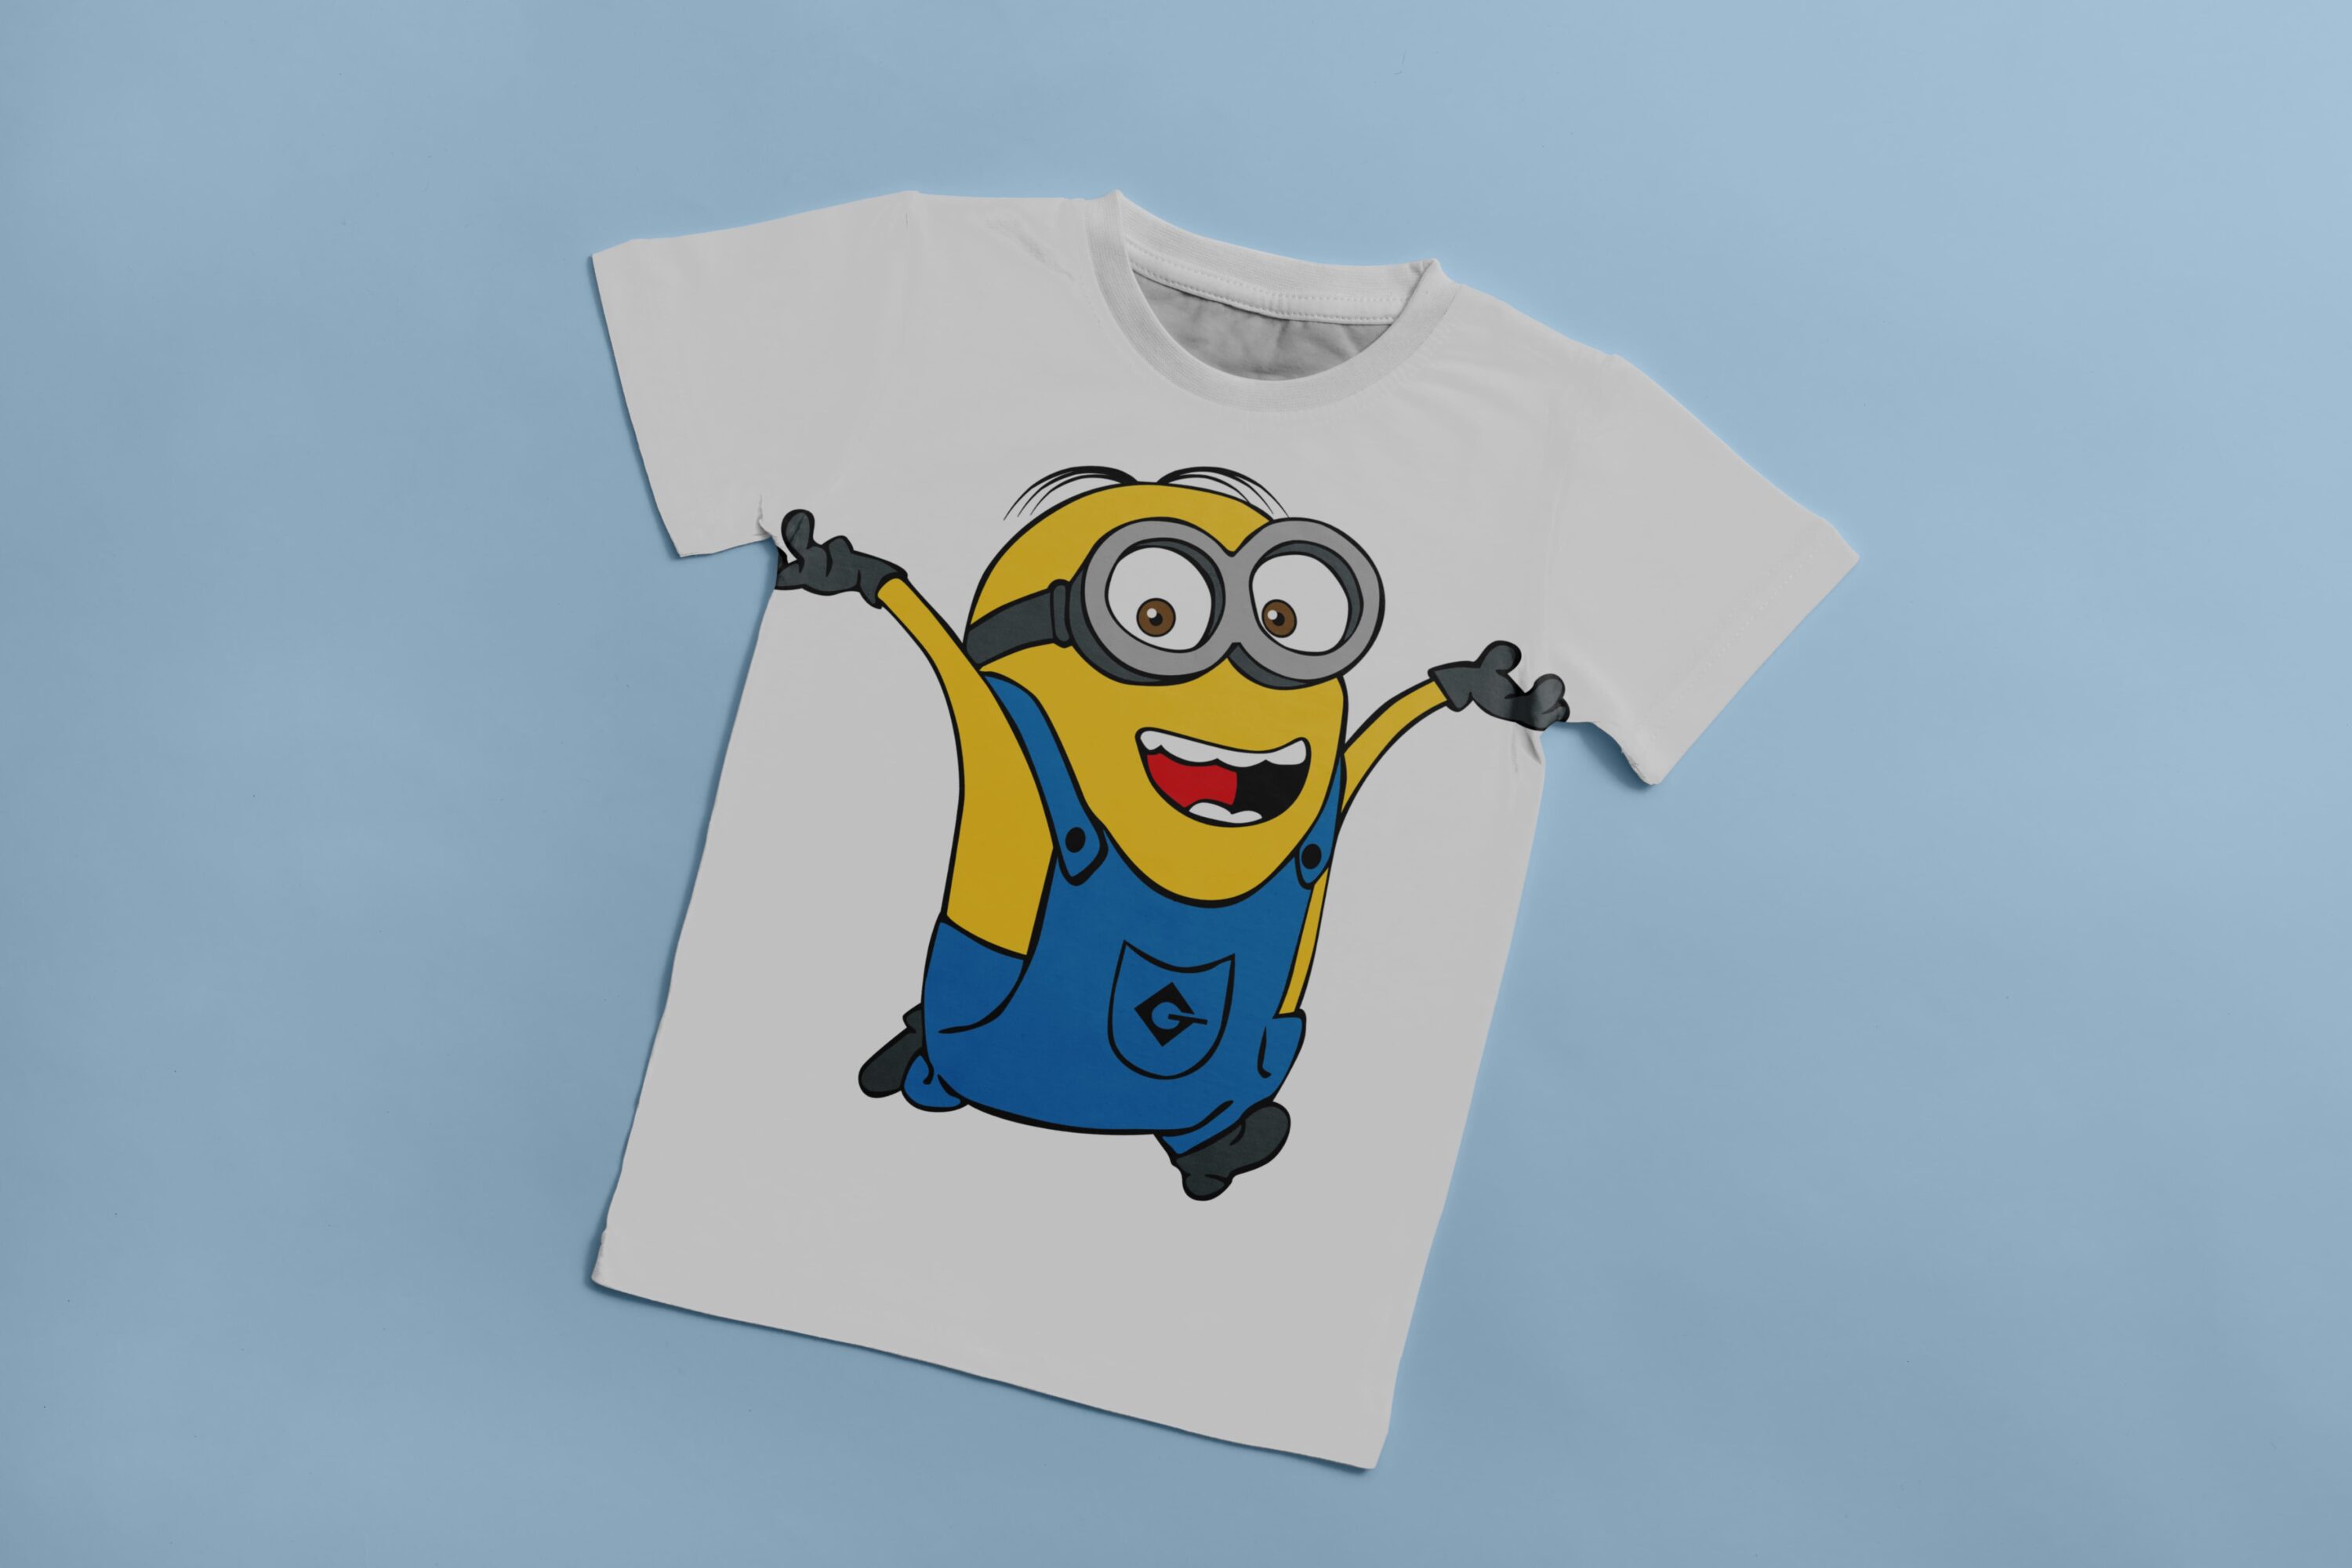 White T-shirt with a picture of a happy character - Minion.